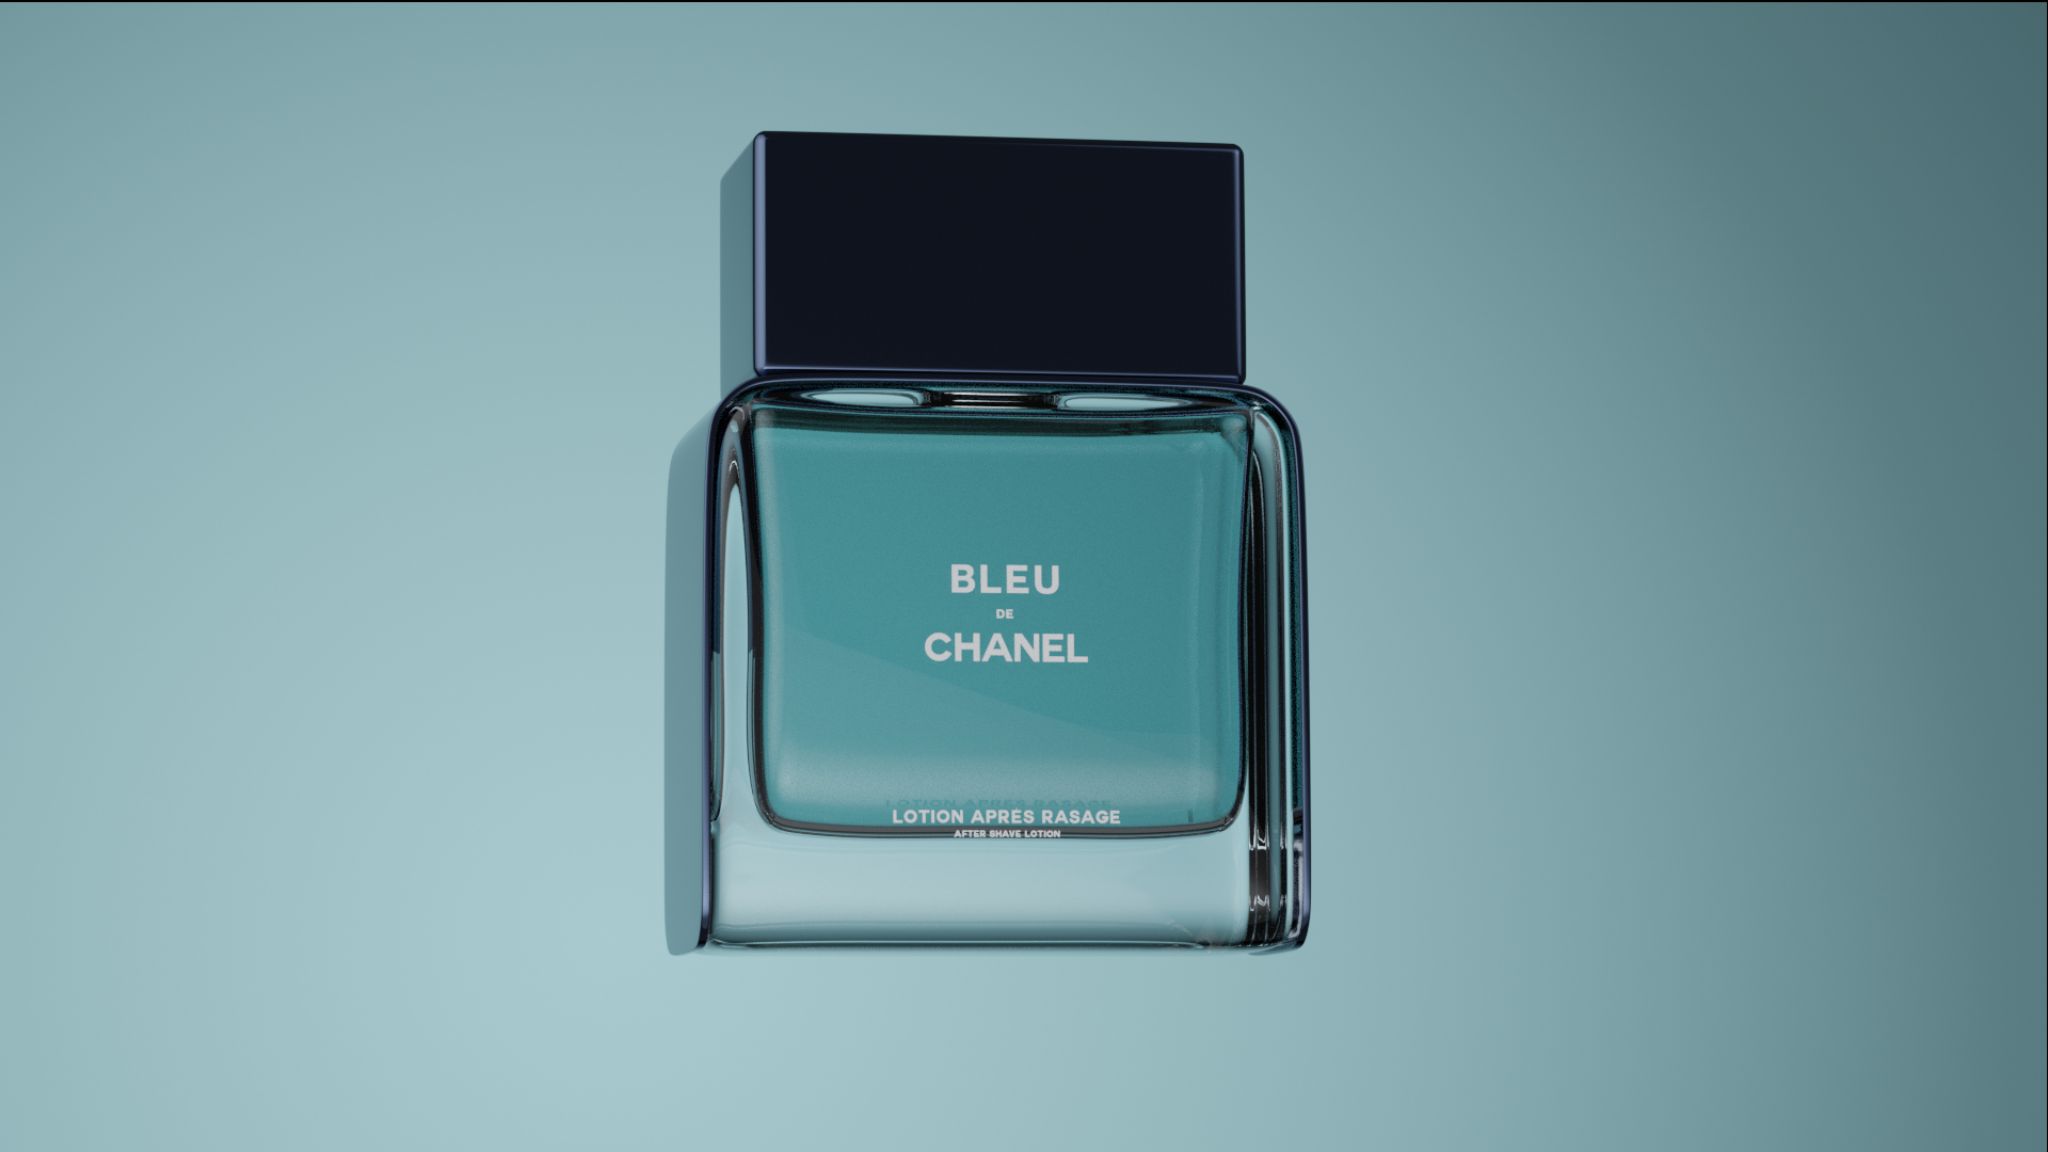 Bleu de Chanel After Shave Lotion on display 3D product promo still